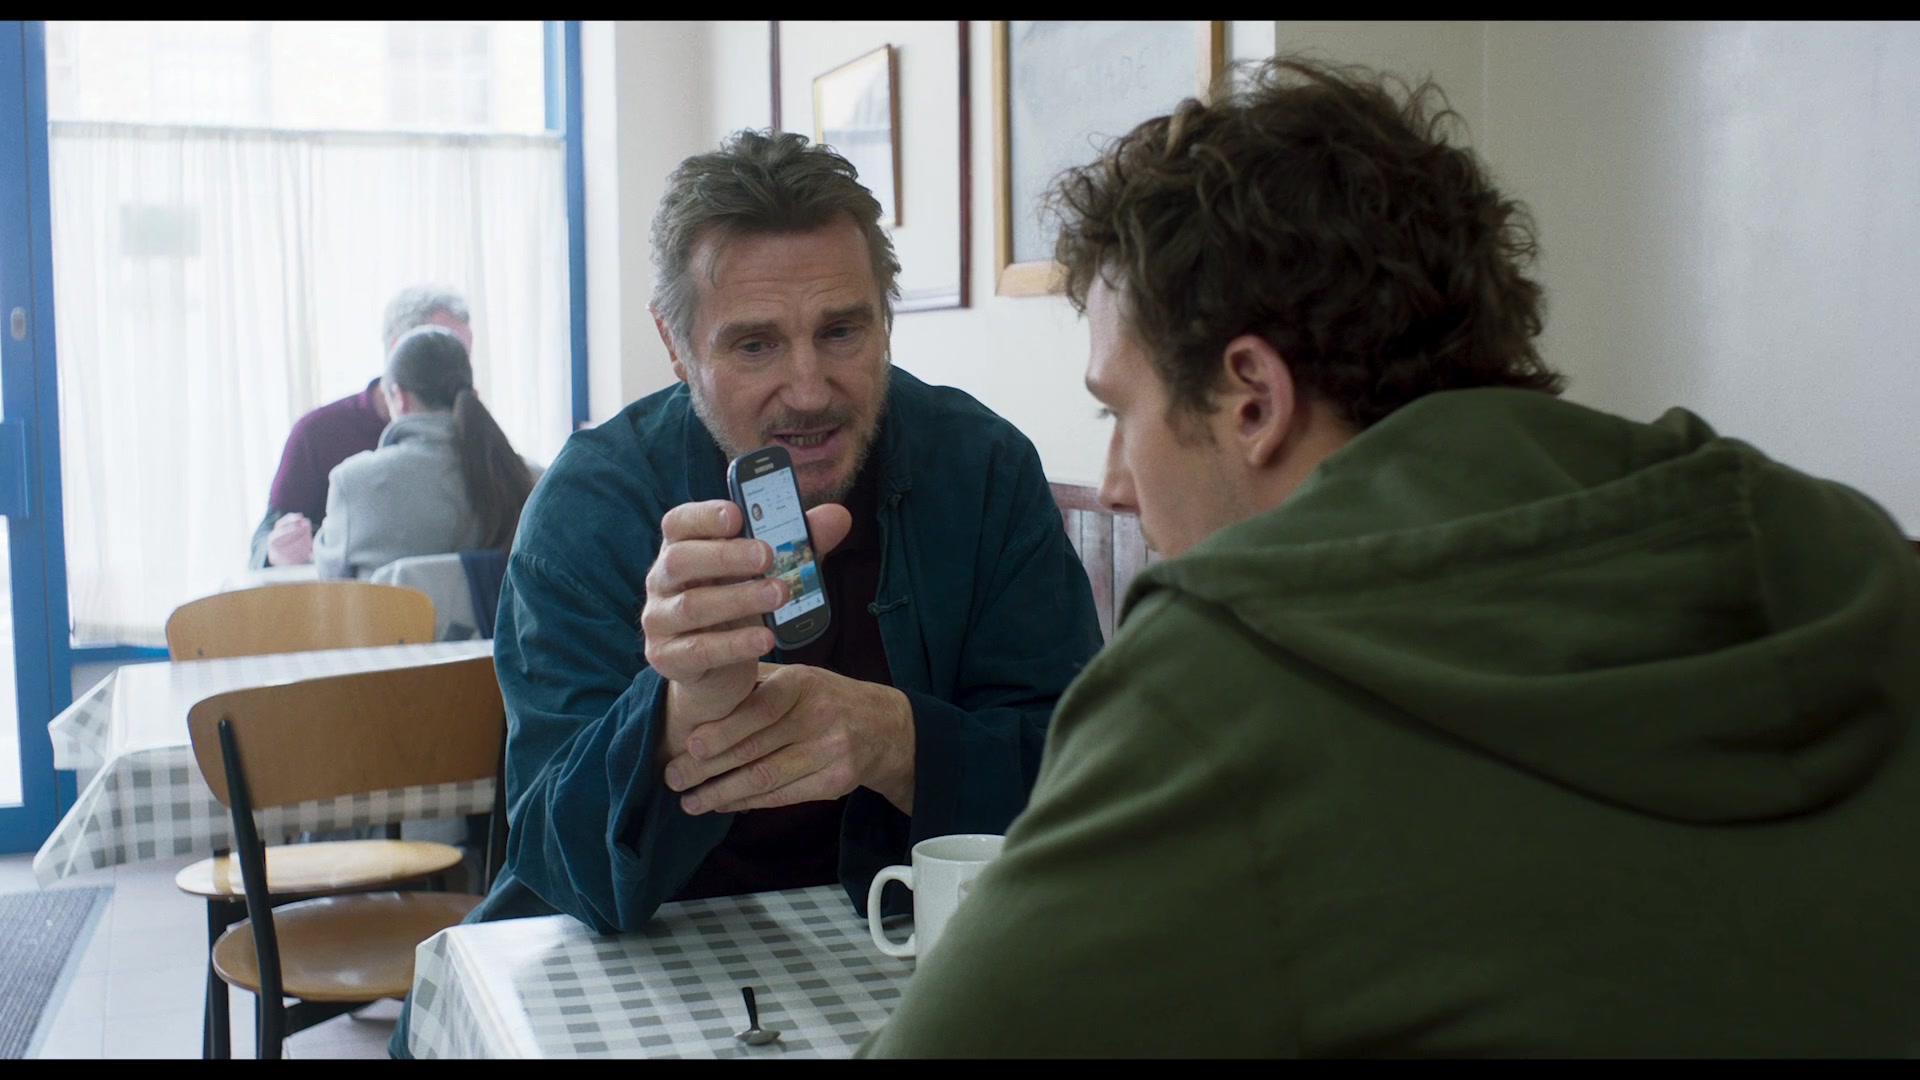 Samsung Phone Of Liam Neeson In Made In Italy (2020)